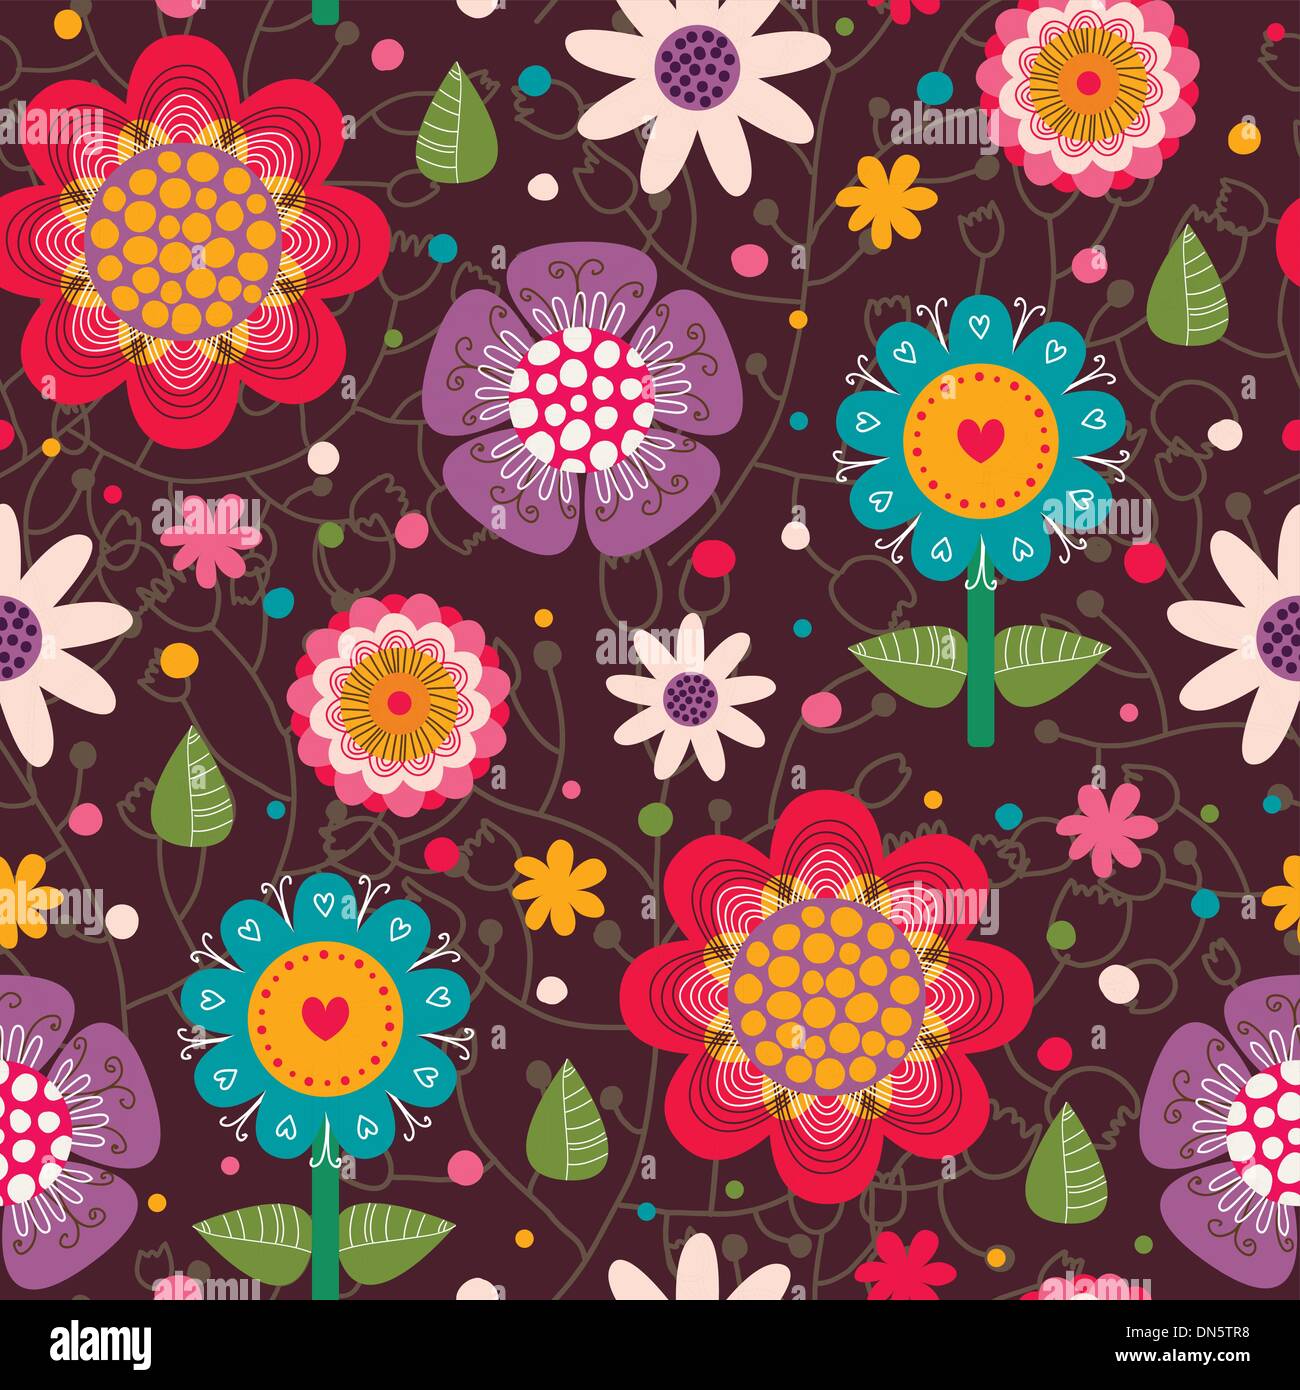 Floral seamless pattern. Stock Vector